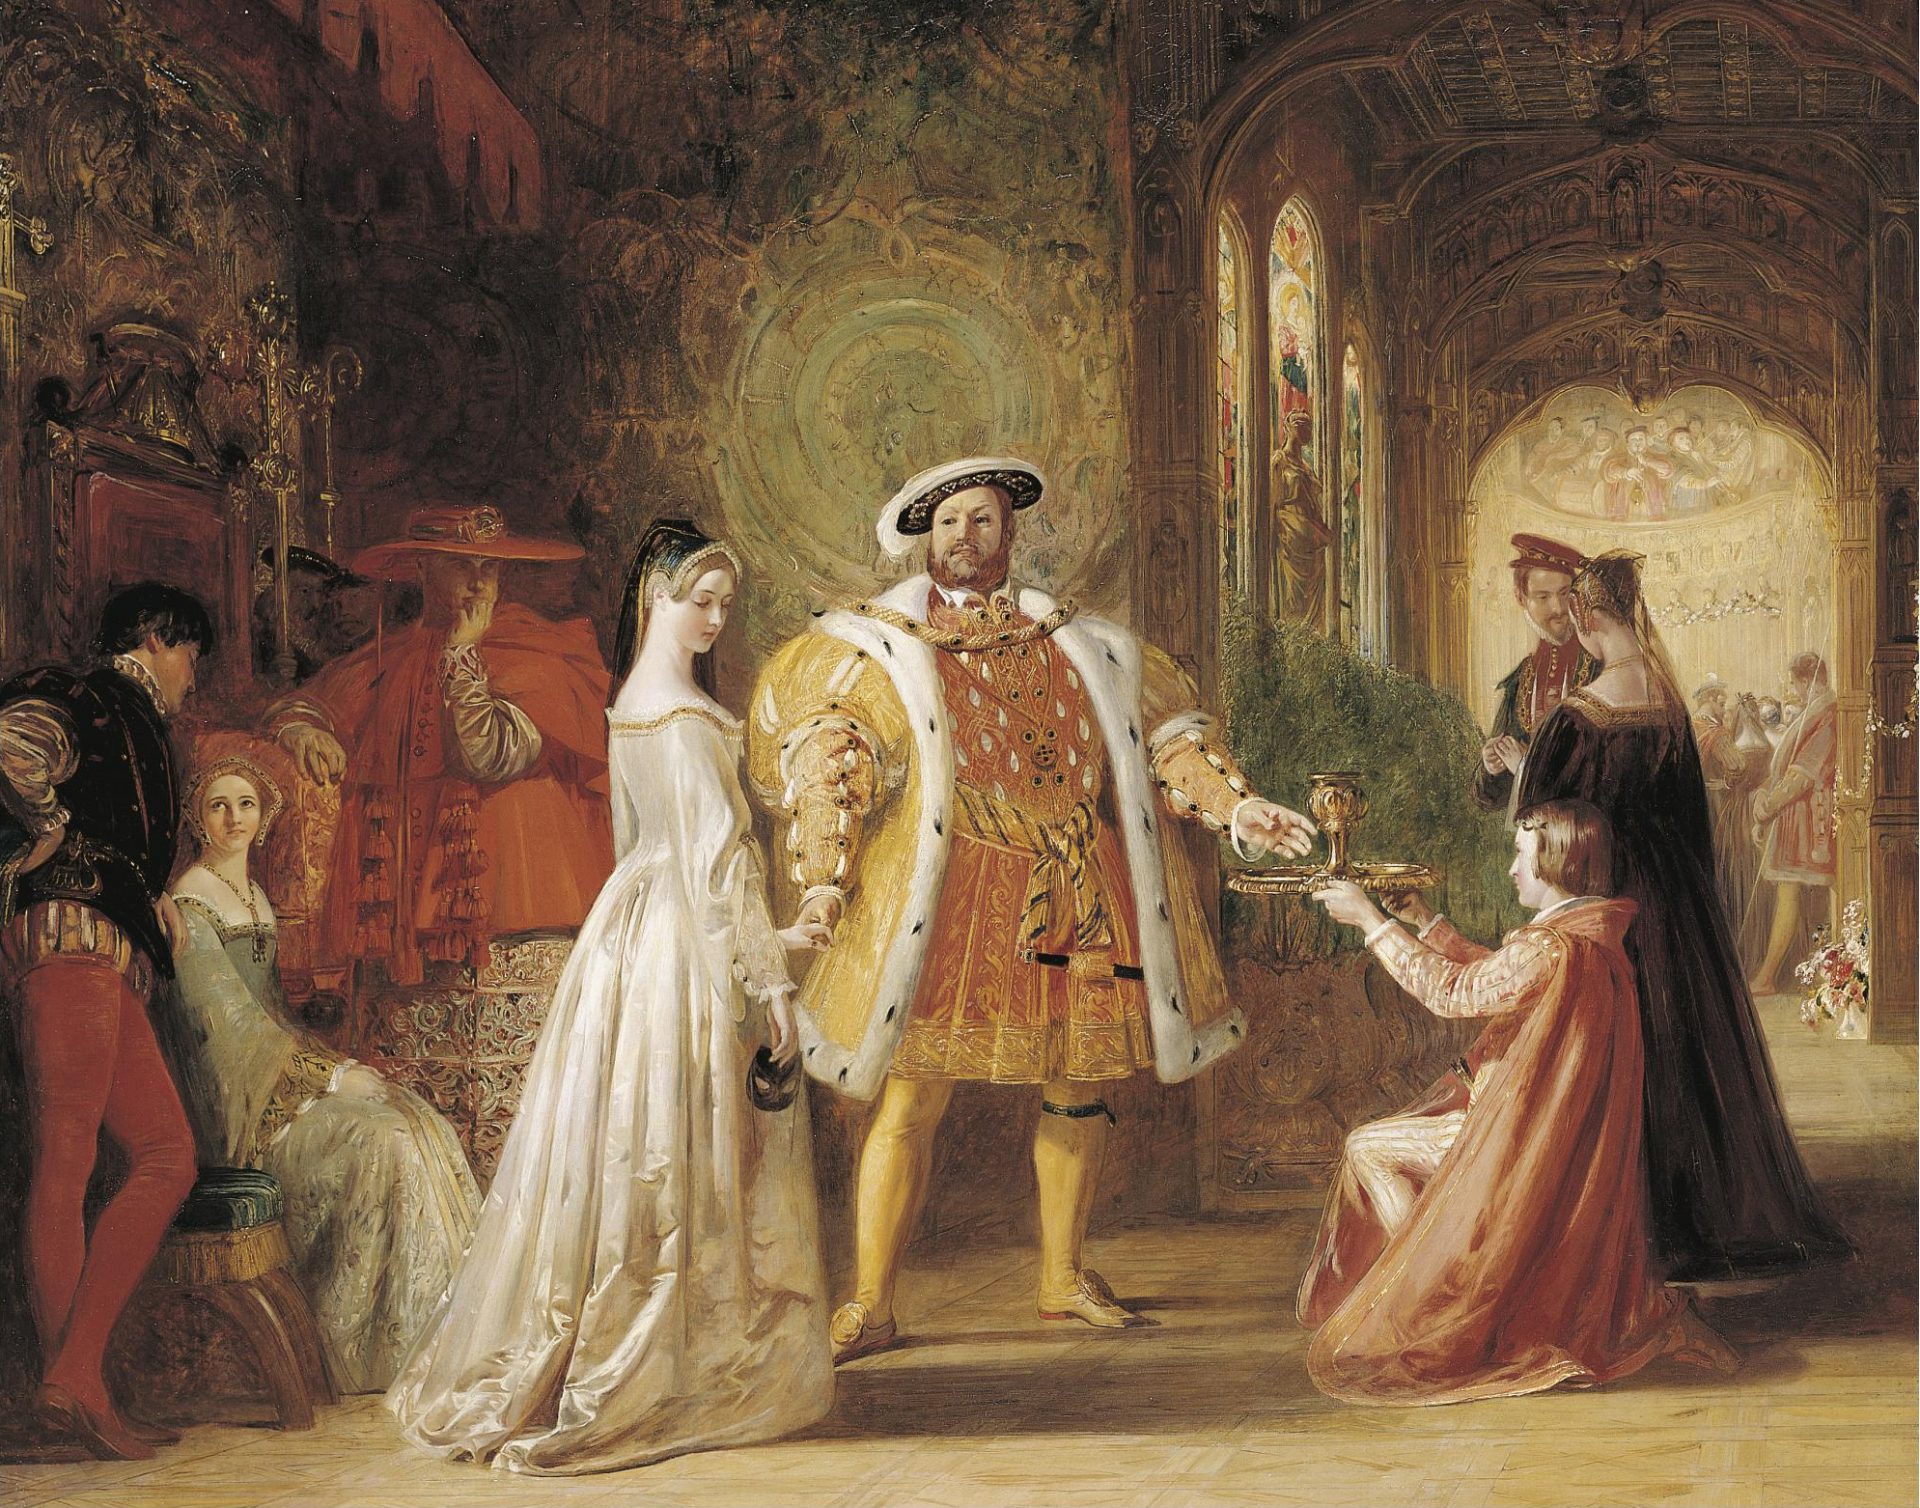 The painting depicts Anne Boleyn and Henry VIII in a room full of people. Anne is wearing a crown on her head and a long white dress with intricate designs. Henry VIII is standing in the center of the room, wearing a fancy fur coat. Several other people are standing around the room.